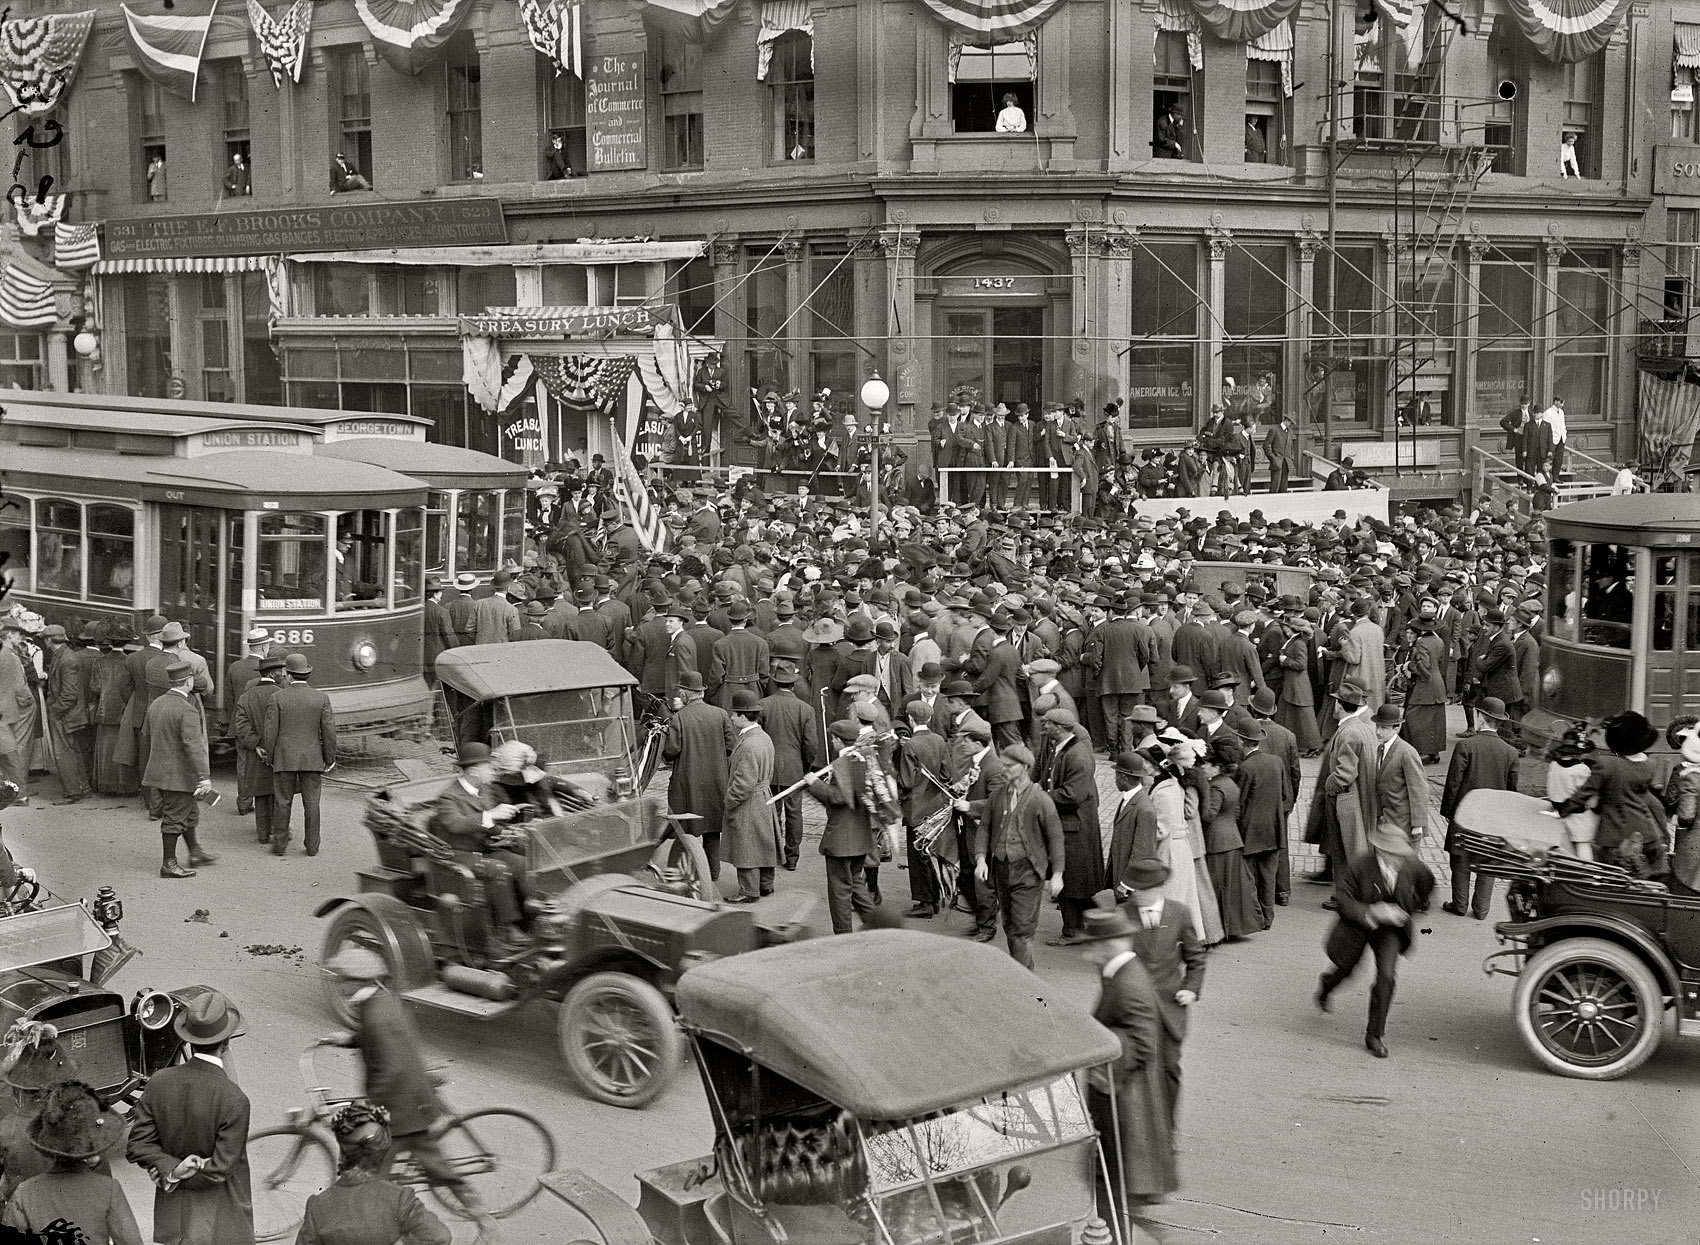 February 28, 1913. "Woman suffrage. Greeting hikers arriving from New York." The scene at Pennsylvania Avenue and 15th Street in Washington. From the pages of the Washington Post: "General" Rosalie Jones and her suffrage "army" marched triumphantly into the Capital shortly before noon yesterday, through the Capitol grounds and down Pennsylvania avenue, with an escort of local enthusiasts and citizens which fairly choked the streets and delayed traffic. It was one of the most remarkable street demonstrations ever seen here." The bunting is decoration for the upcoming presidential inauguration. View full size.